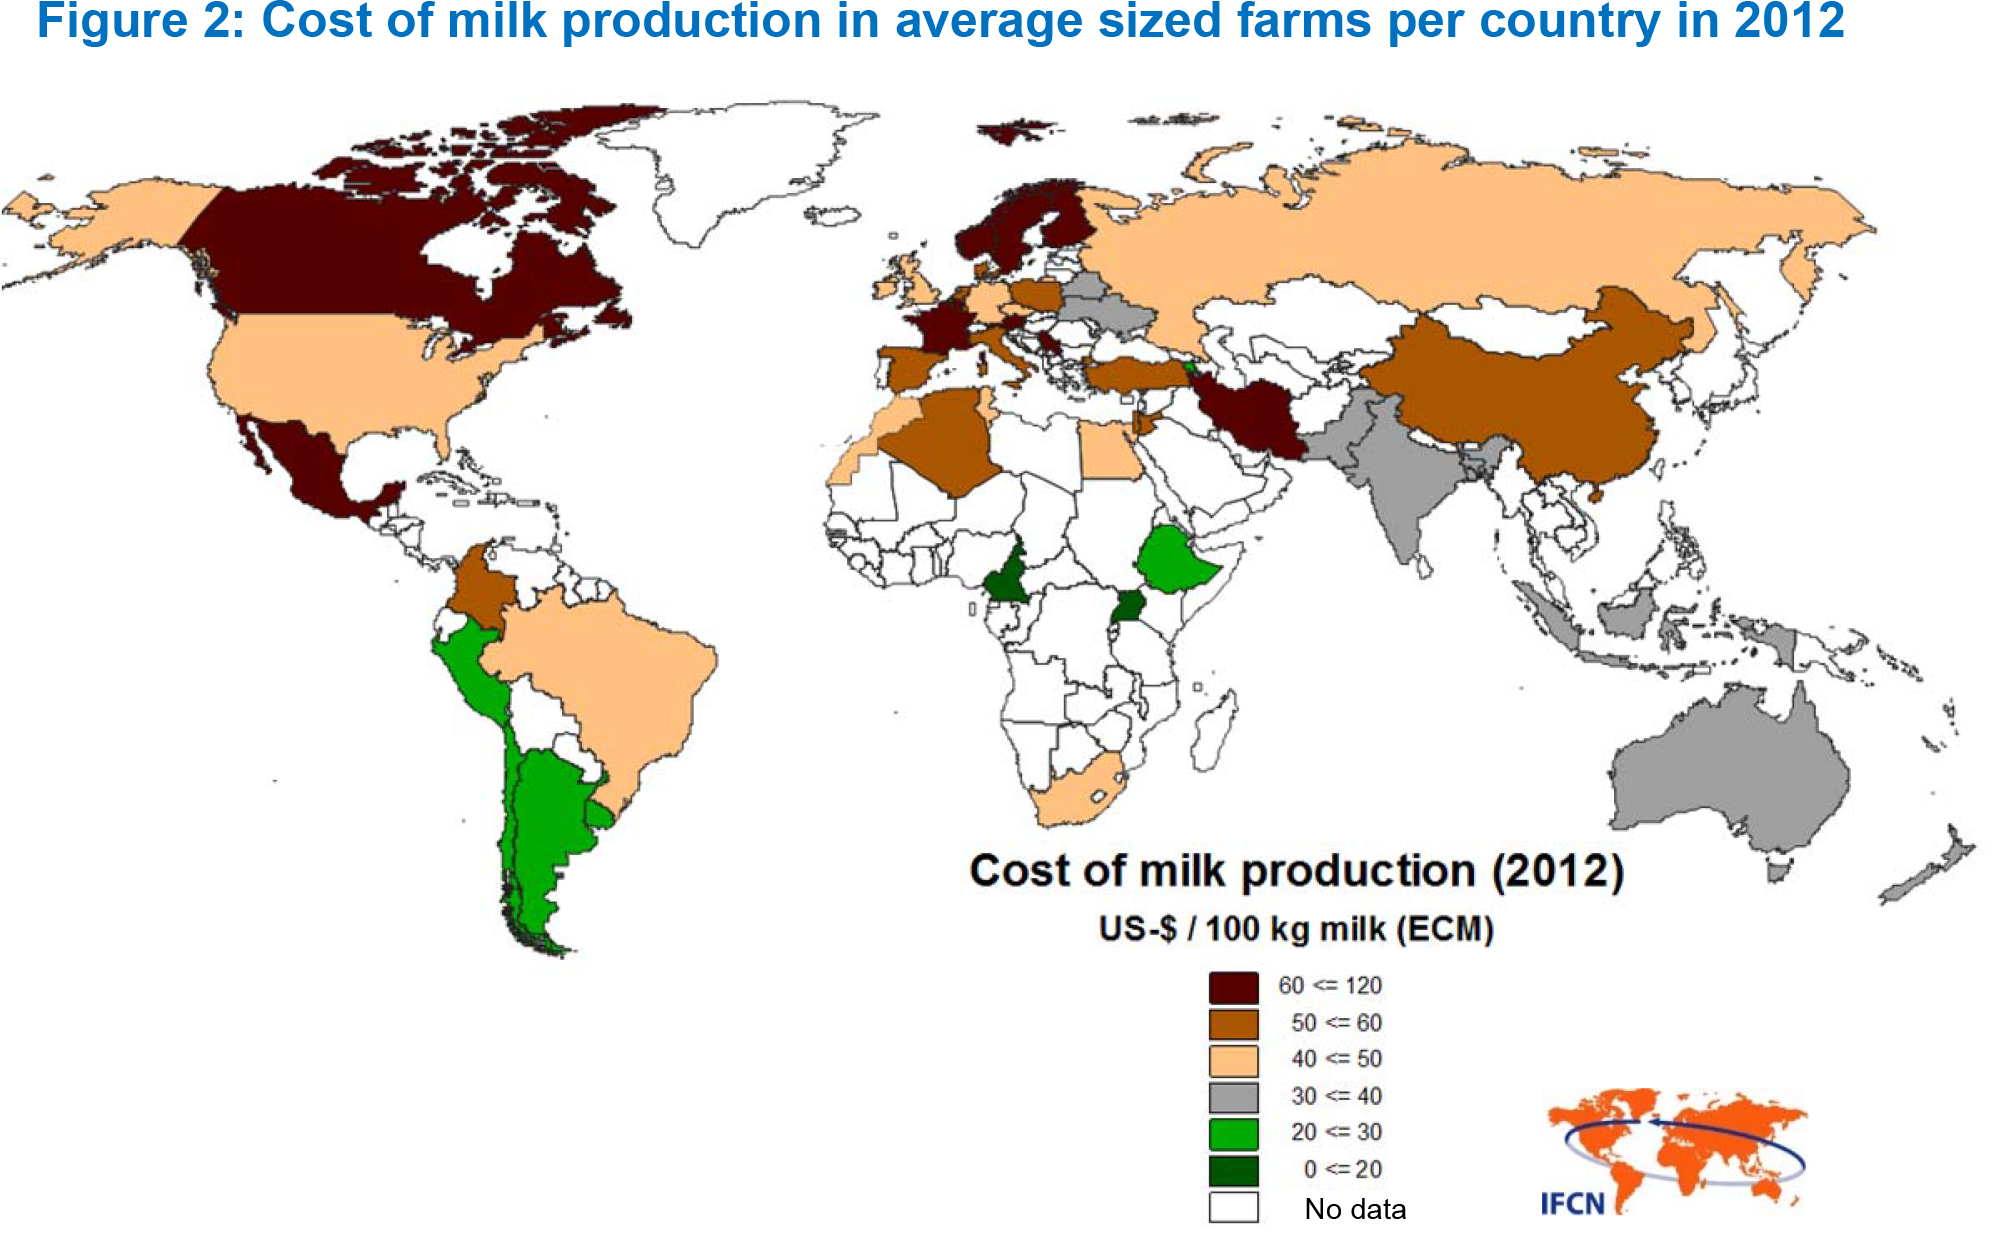 Cost Of Milk Production The Bullvine The Dairy Information You